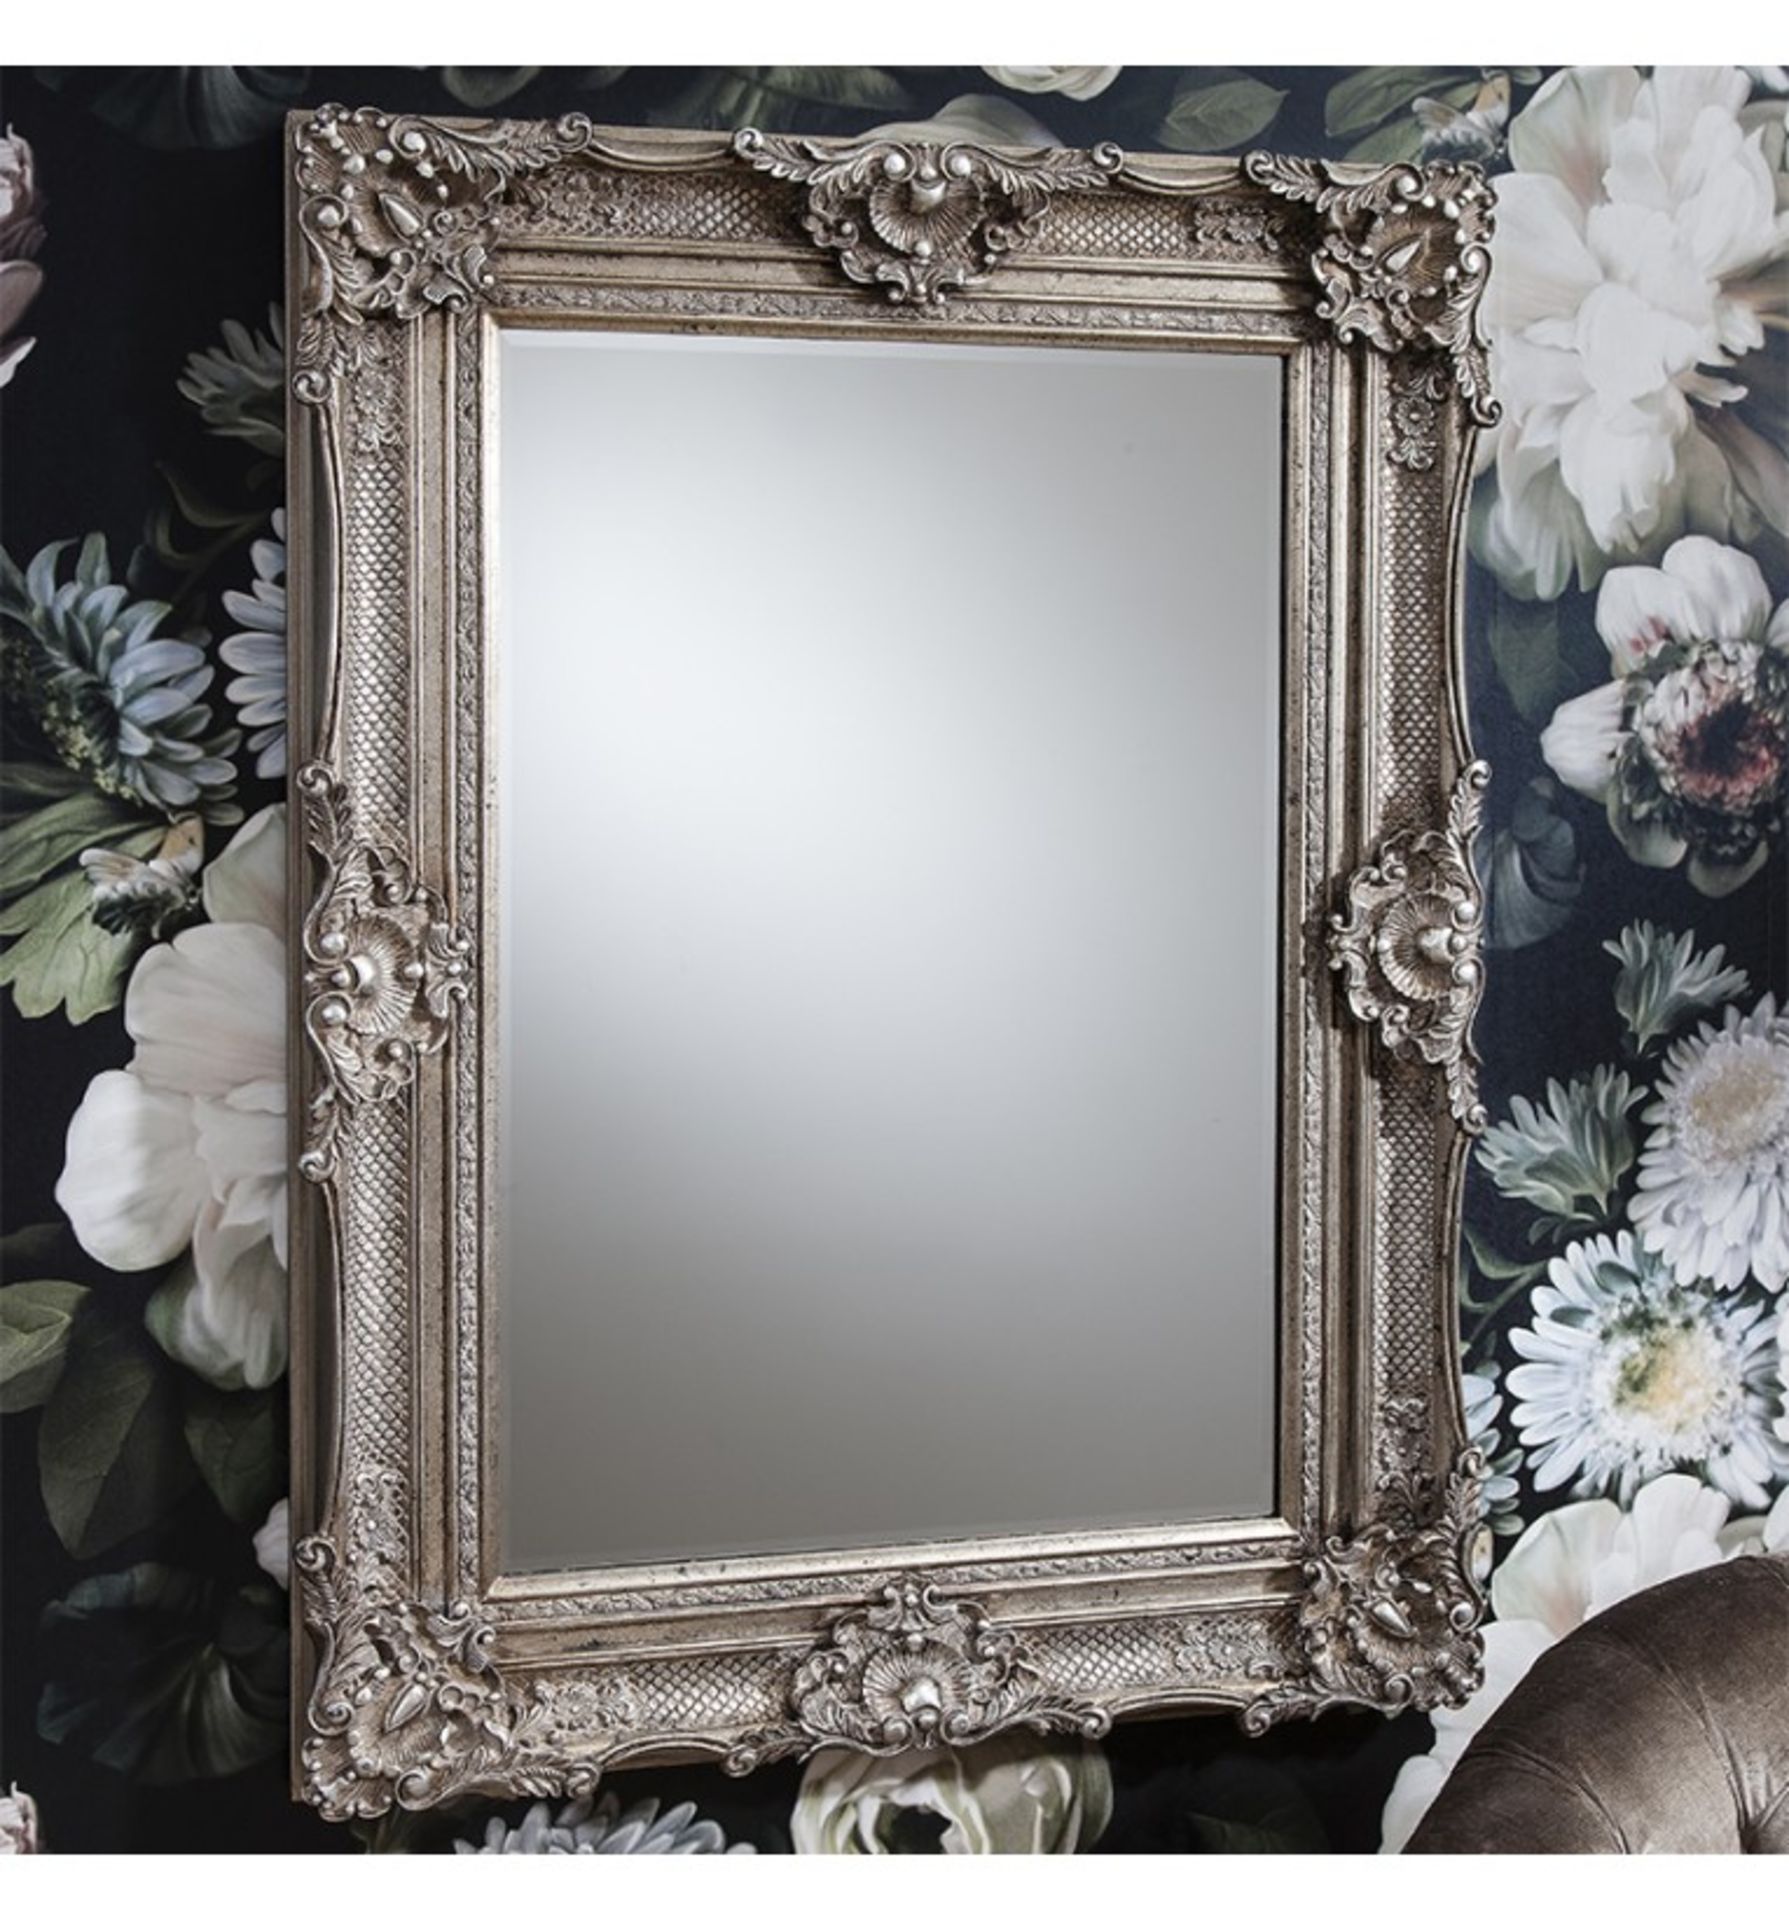 Stretton Rectangle Mirror Silver 1195x890mm Chic Boudoir mirror in a timeless, antique white finish.